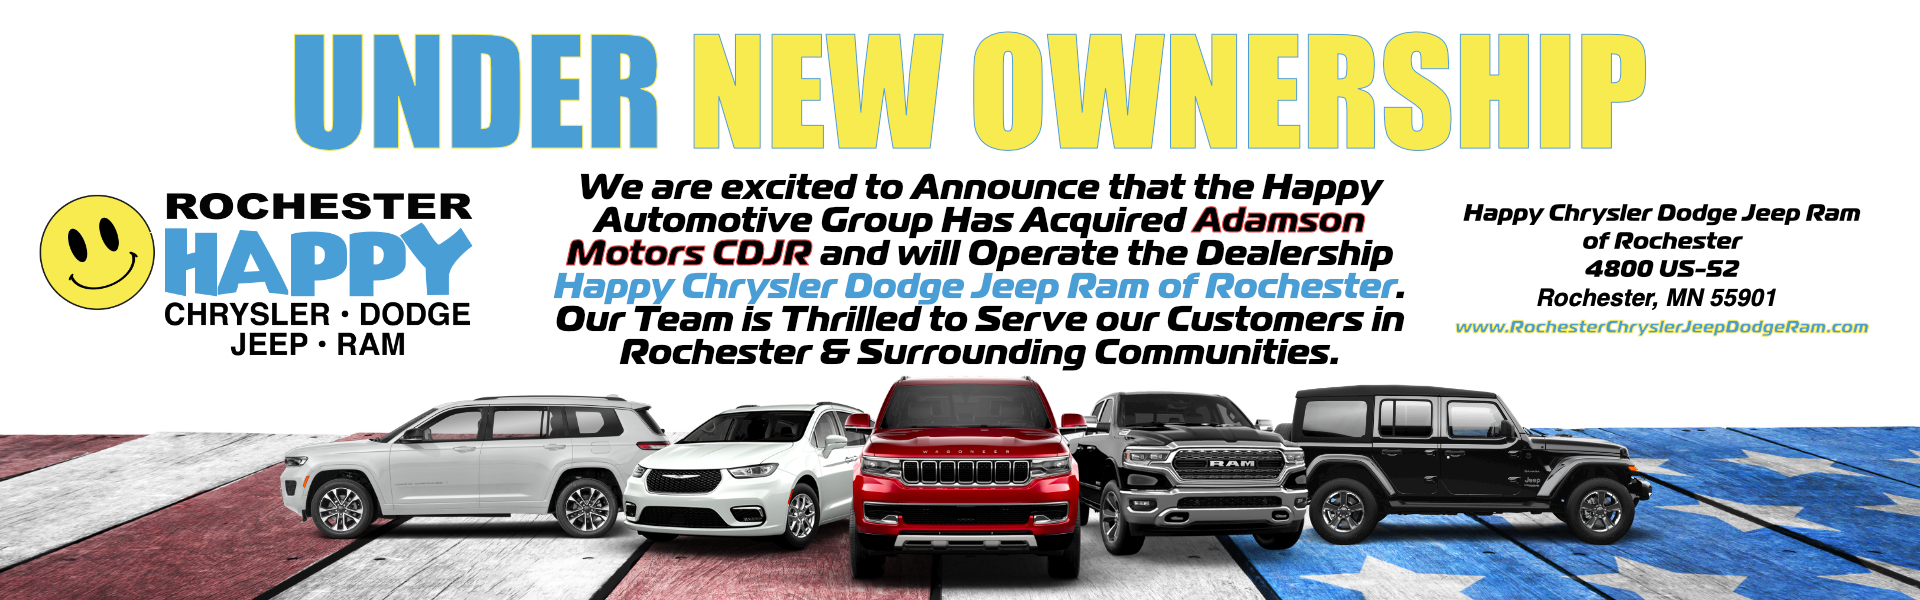 Happy Chrysler Dodge Jeep Ram of Rochester (formerly known as Adamson Motors)